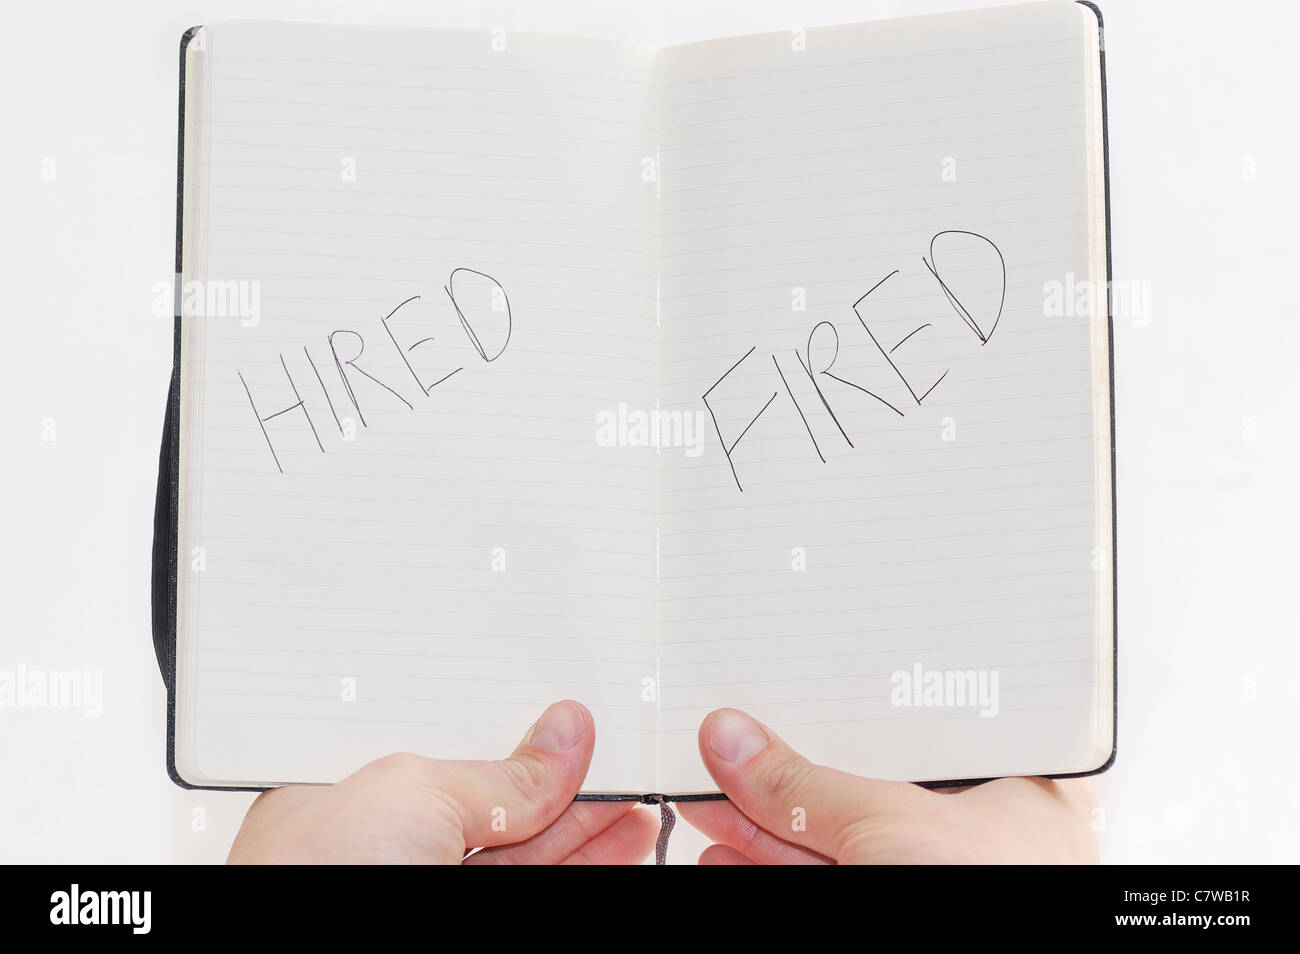 Hired/Fired choices on notepad, white background. Stock Photo